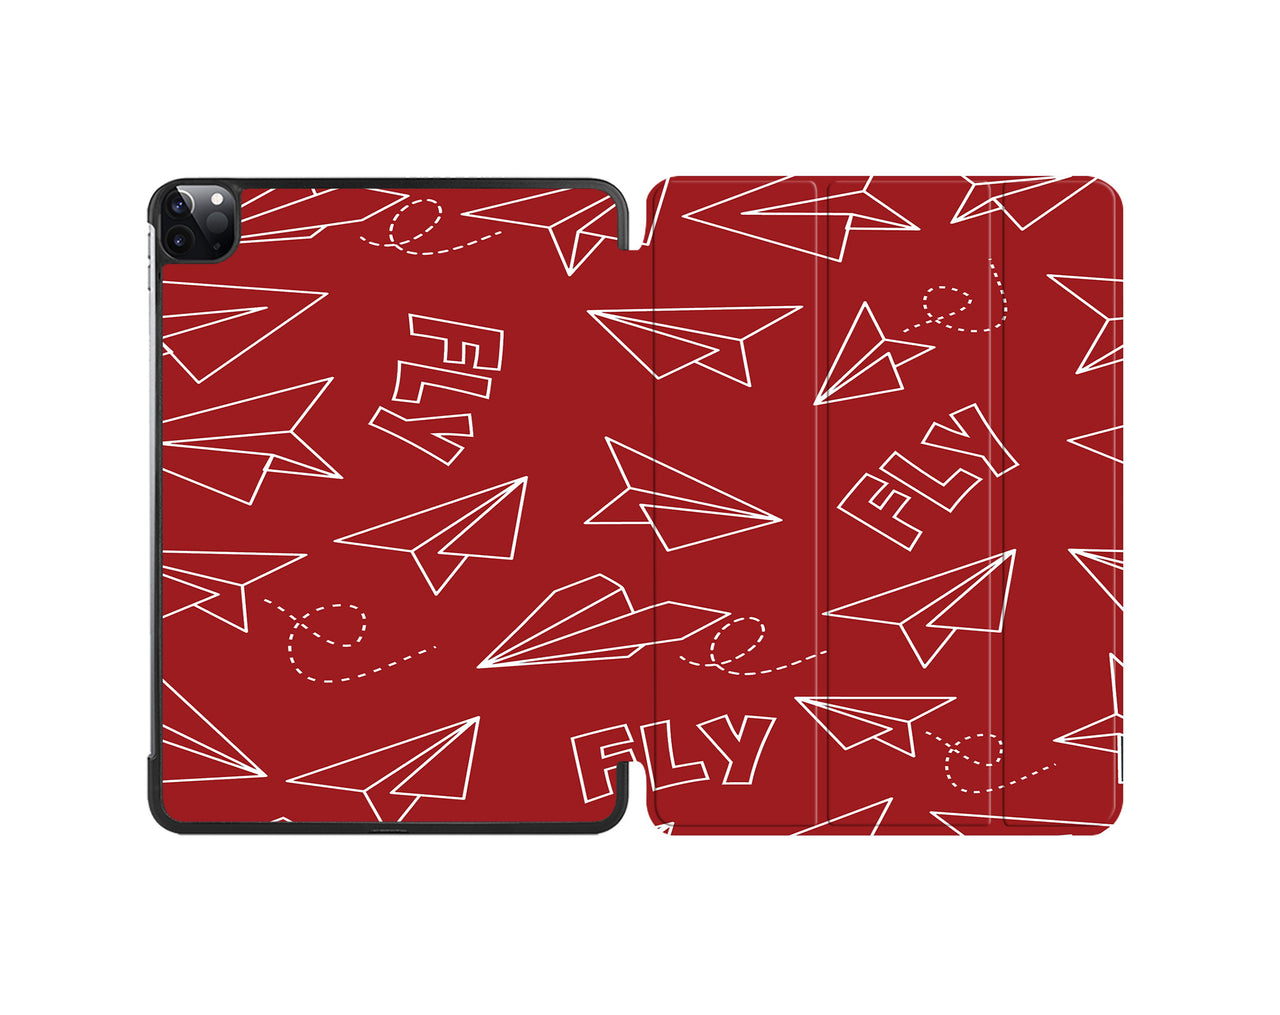 Paper Airplane & Fly (Red) Designed iPad Cases